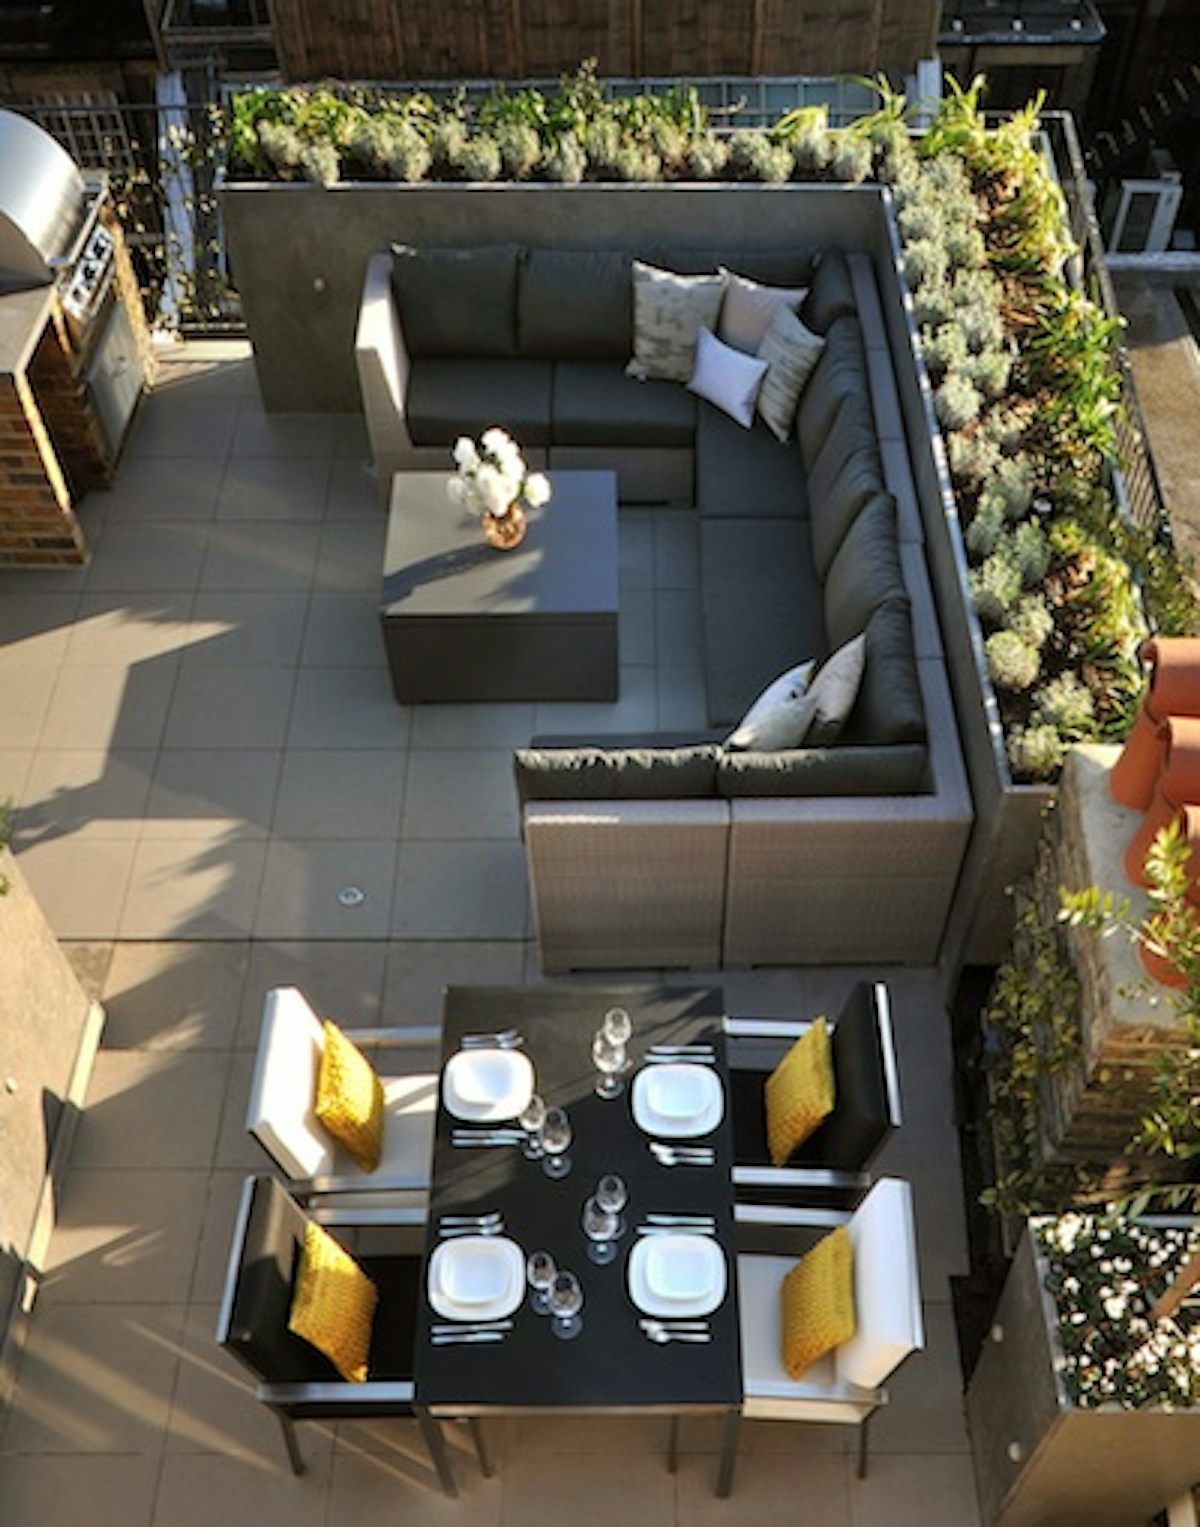 6 Stylish Rooftop Terrace Furniture & Roof Design Ideas - LuxDeco Style Guide